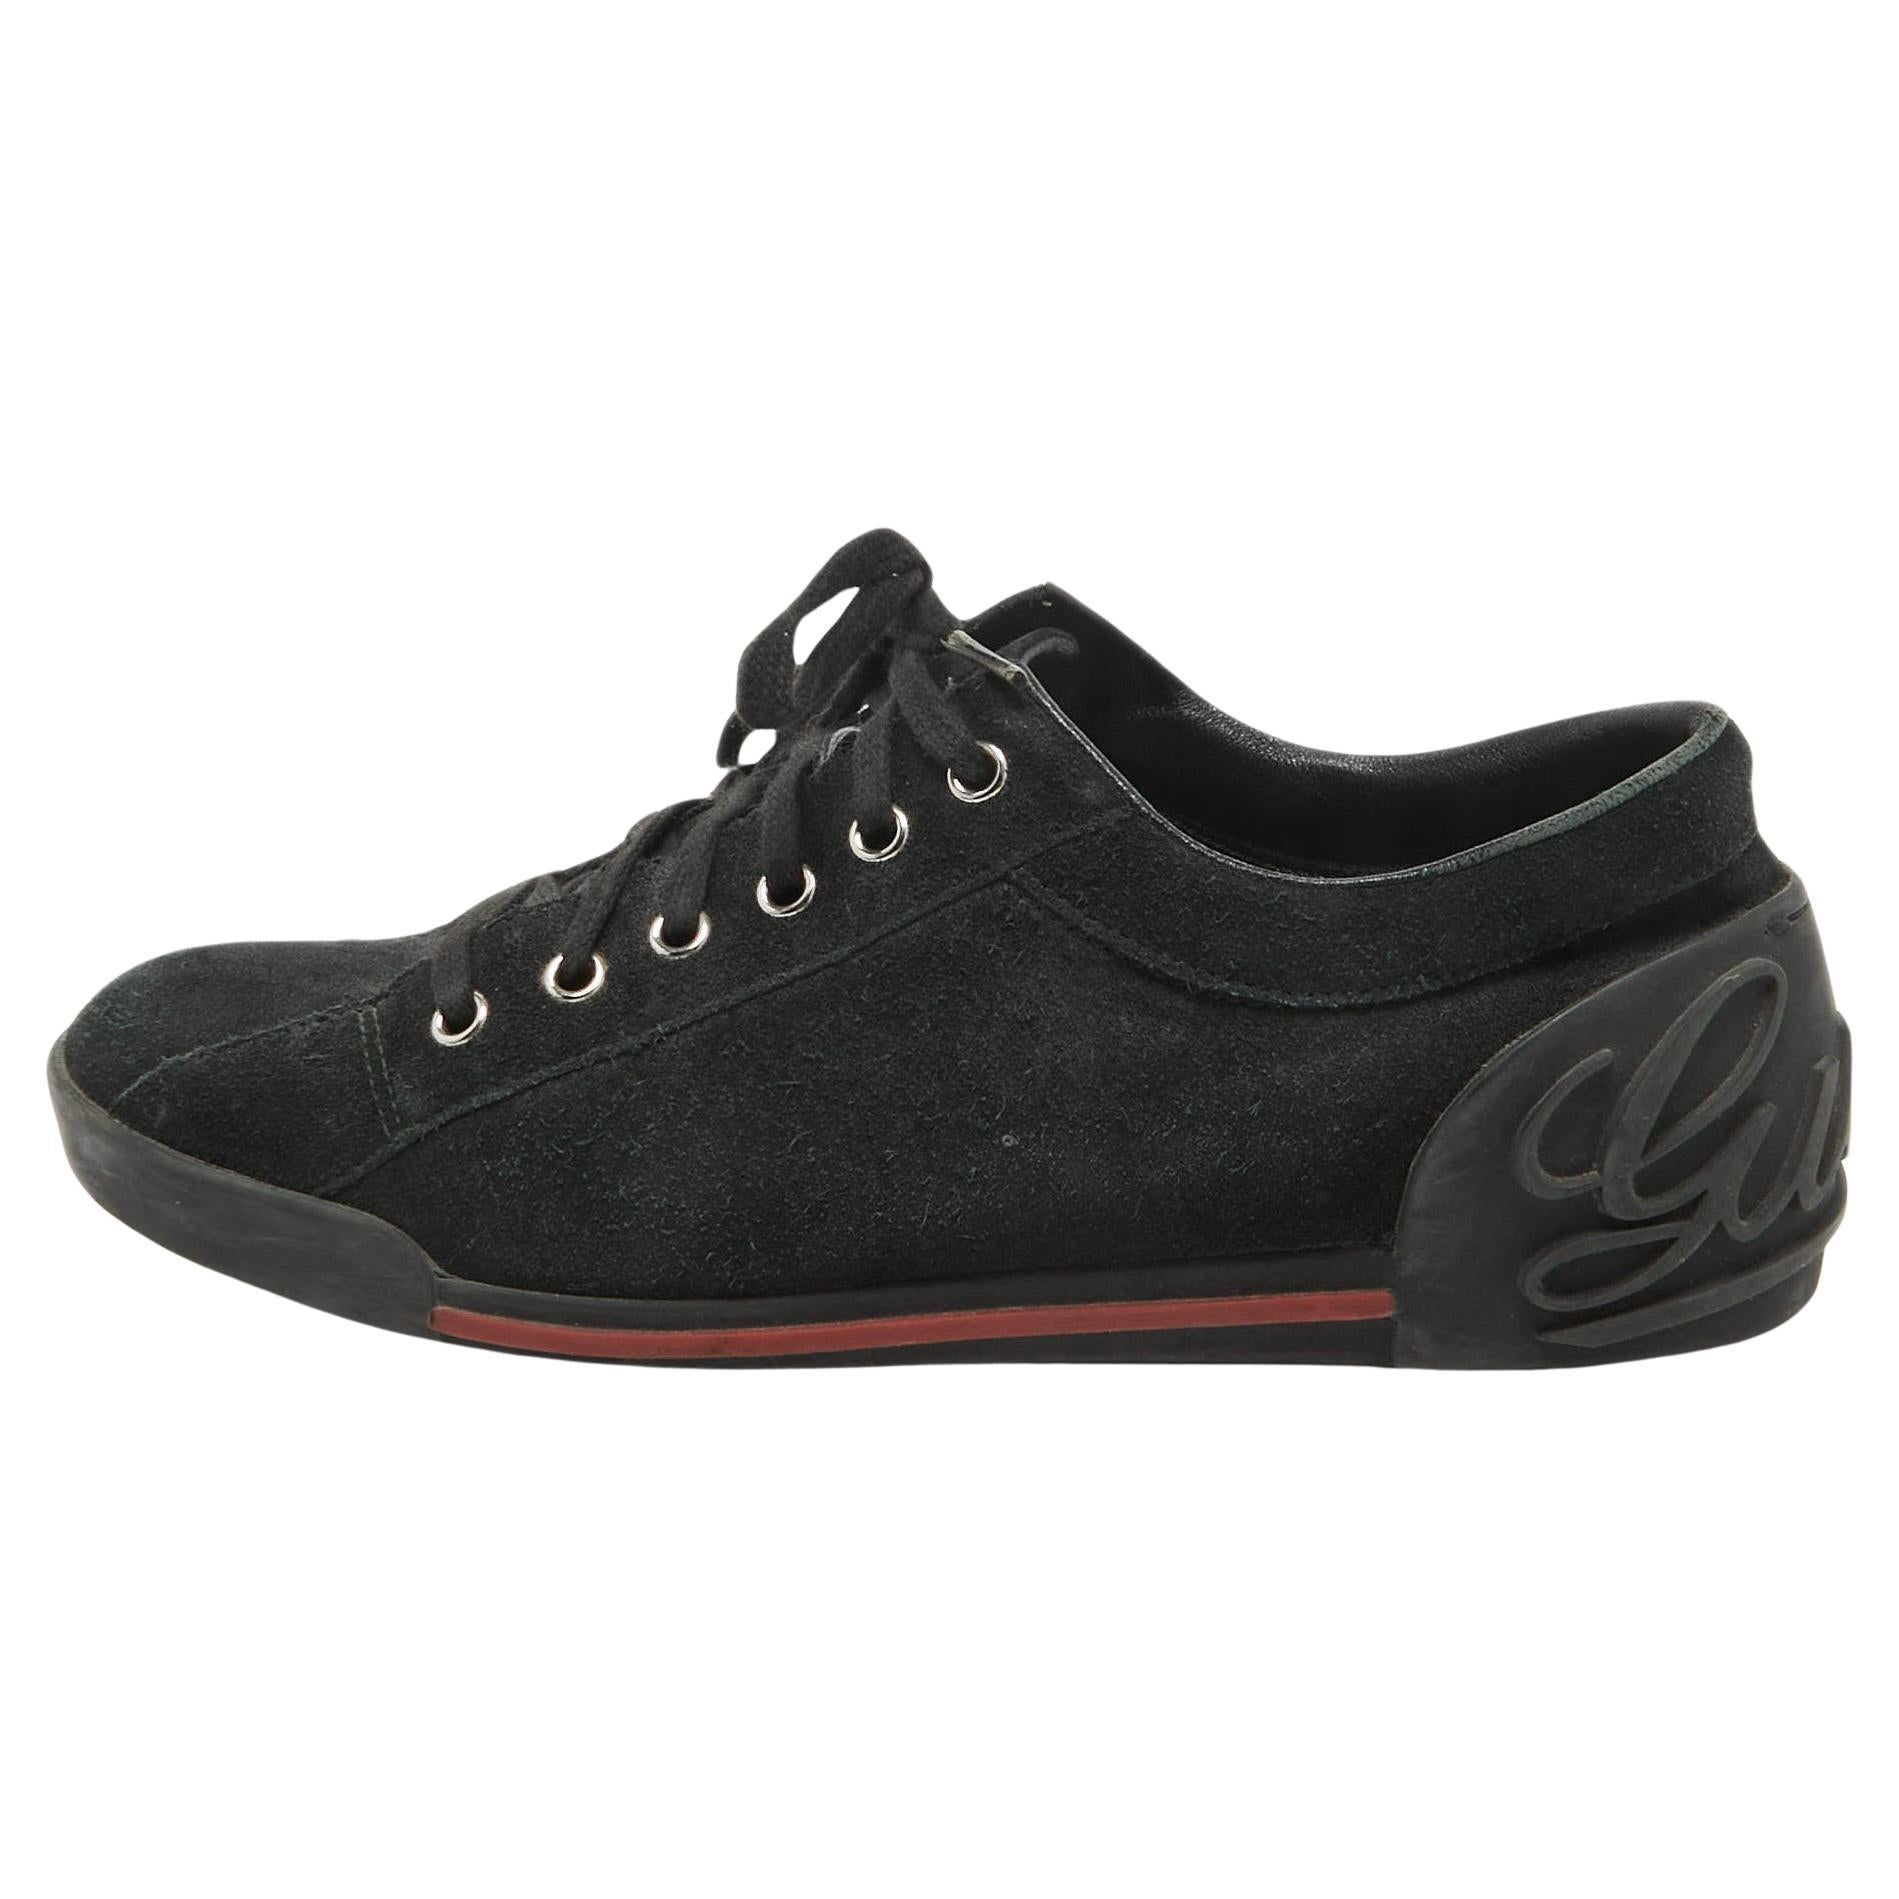 Gucci Black Suede Lace Up Sneakers Size 38 For Sale